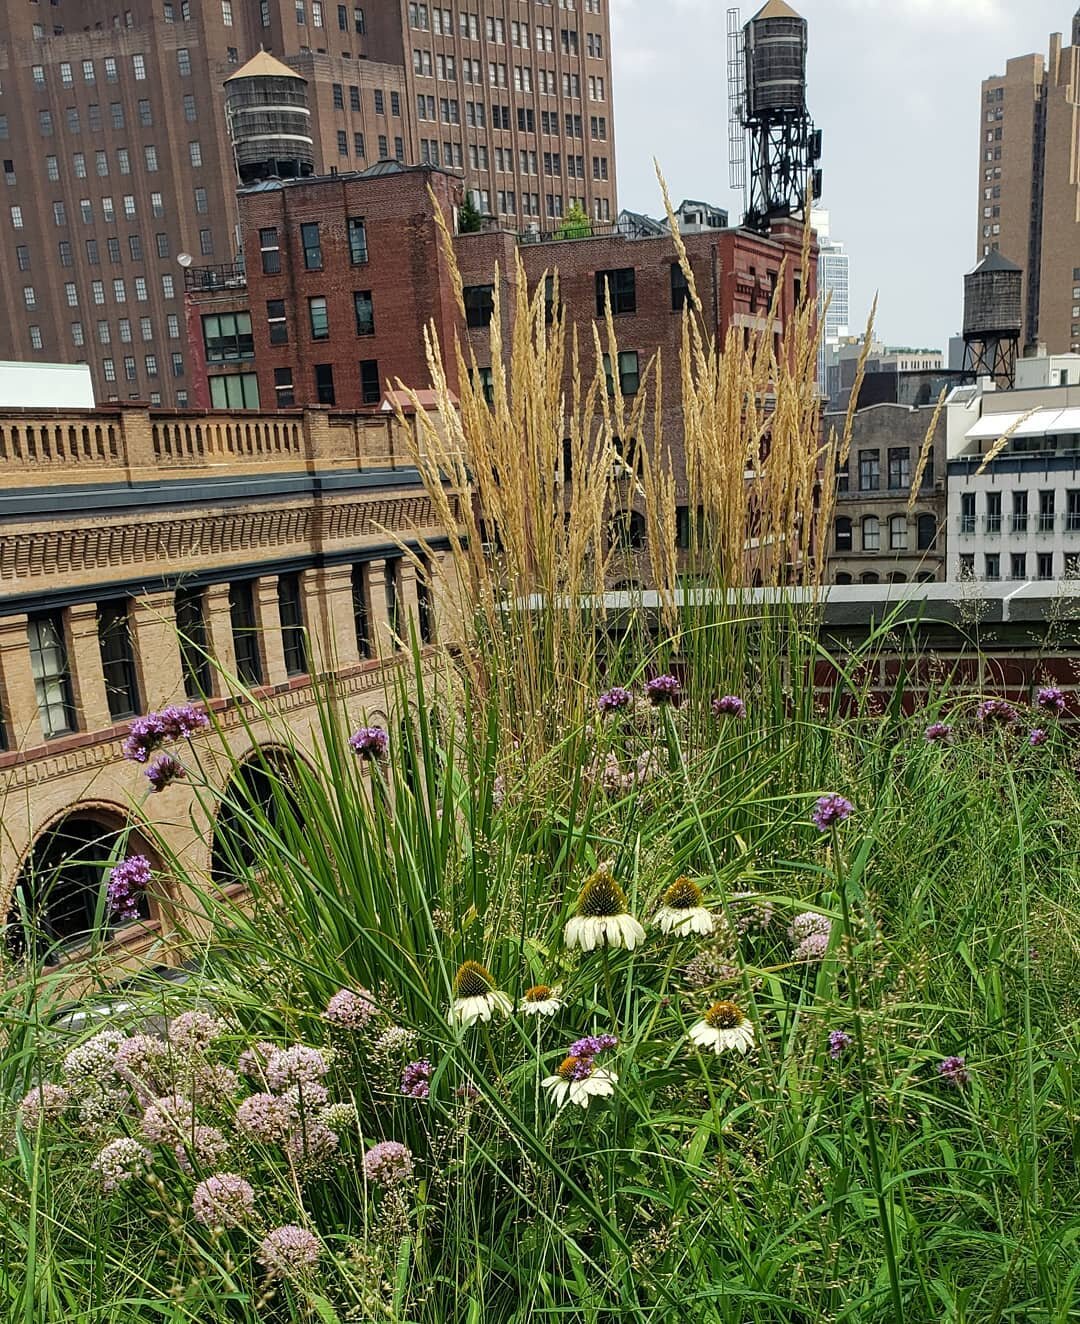 1st grow season for our Tribeca Rooftop Meadow